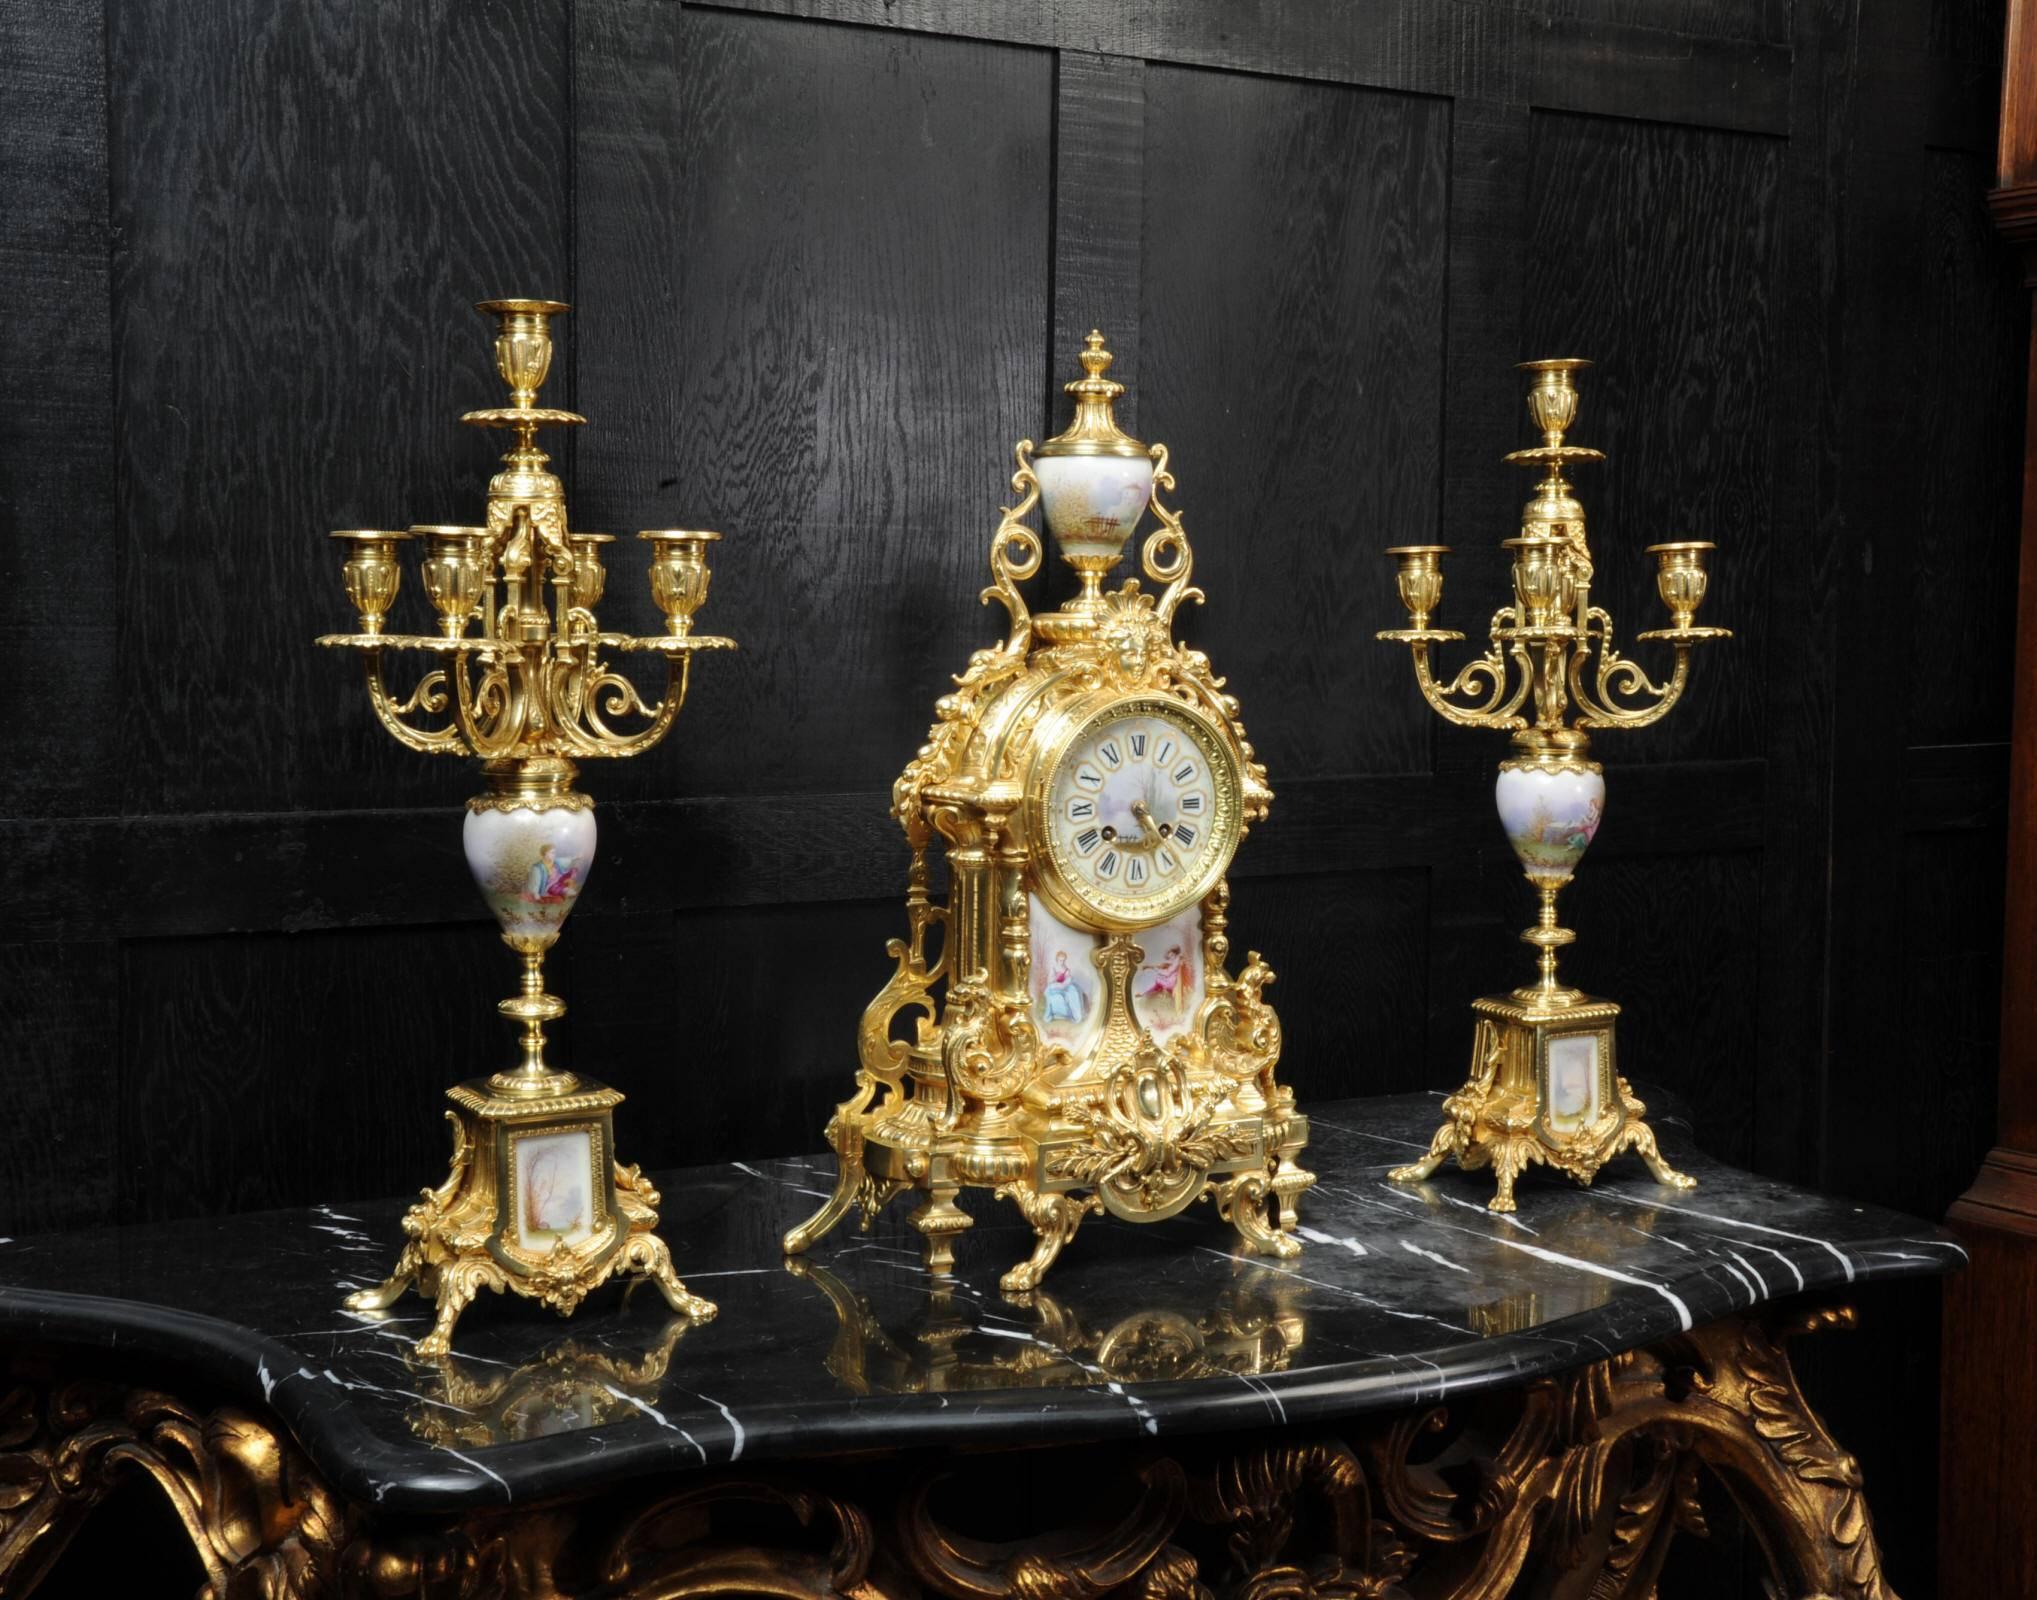 A large and stunning ormolu and Sèvres style porcelain clock set, in lovely fully overhauled condition. The original finely gilded bronze is in excellent condition with exquisitely painted porcelain panels and urns featuring a young couple in a